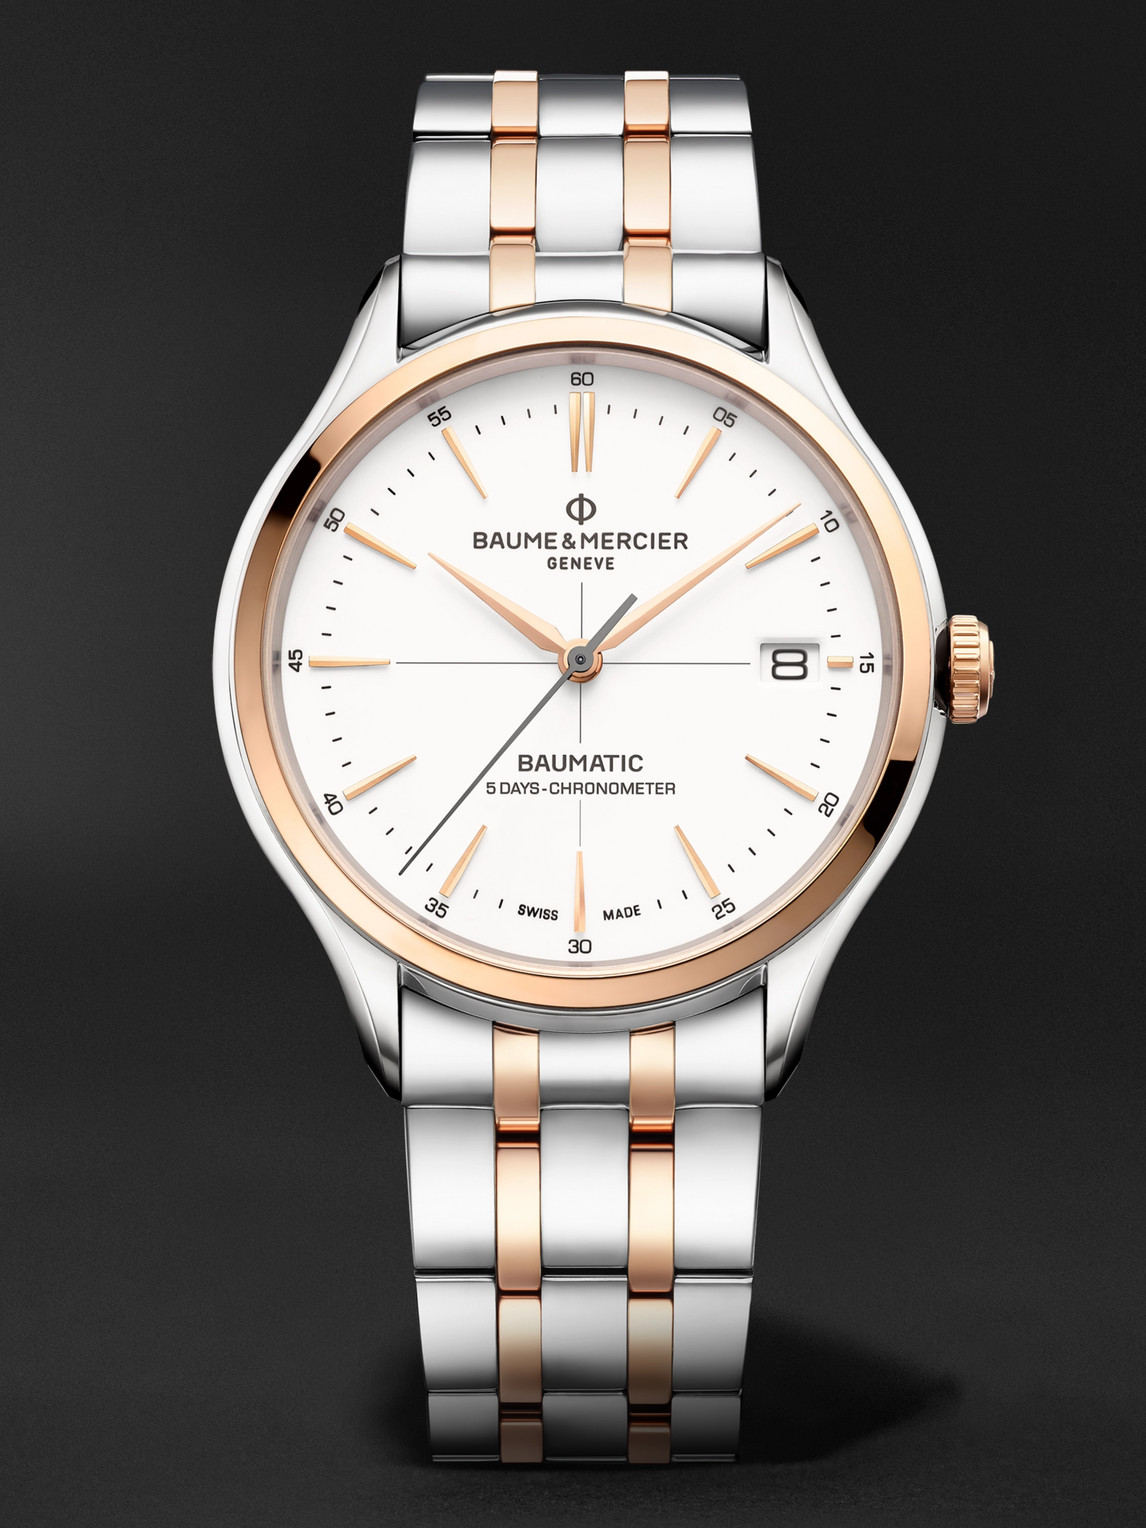 Clifton Baumatic Automatic Chronometer 40mm Stainless Steel and 18-Karat Rose Gold-Capped Watch, Ref. No. M0A10458